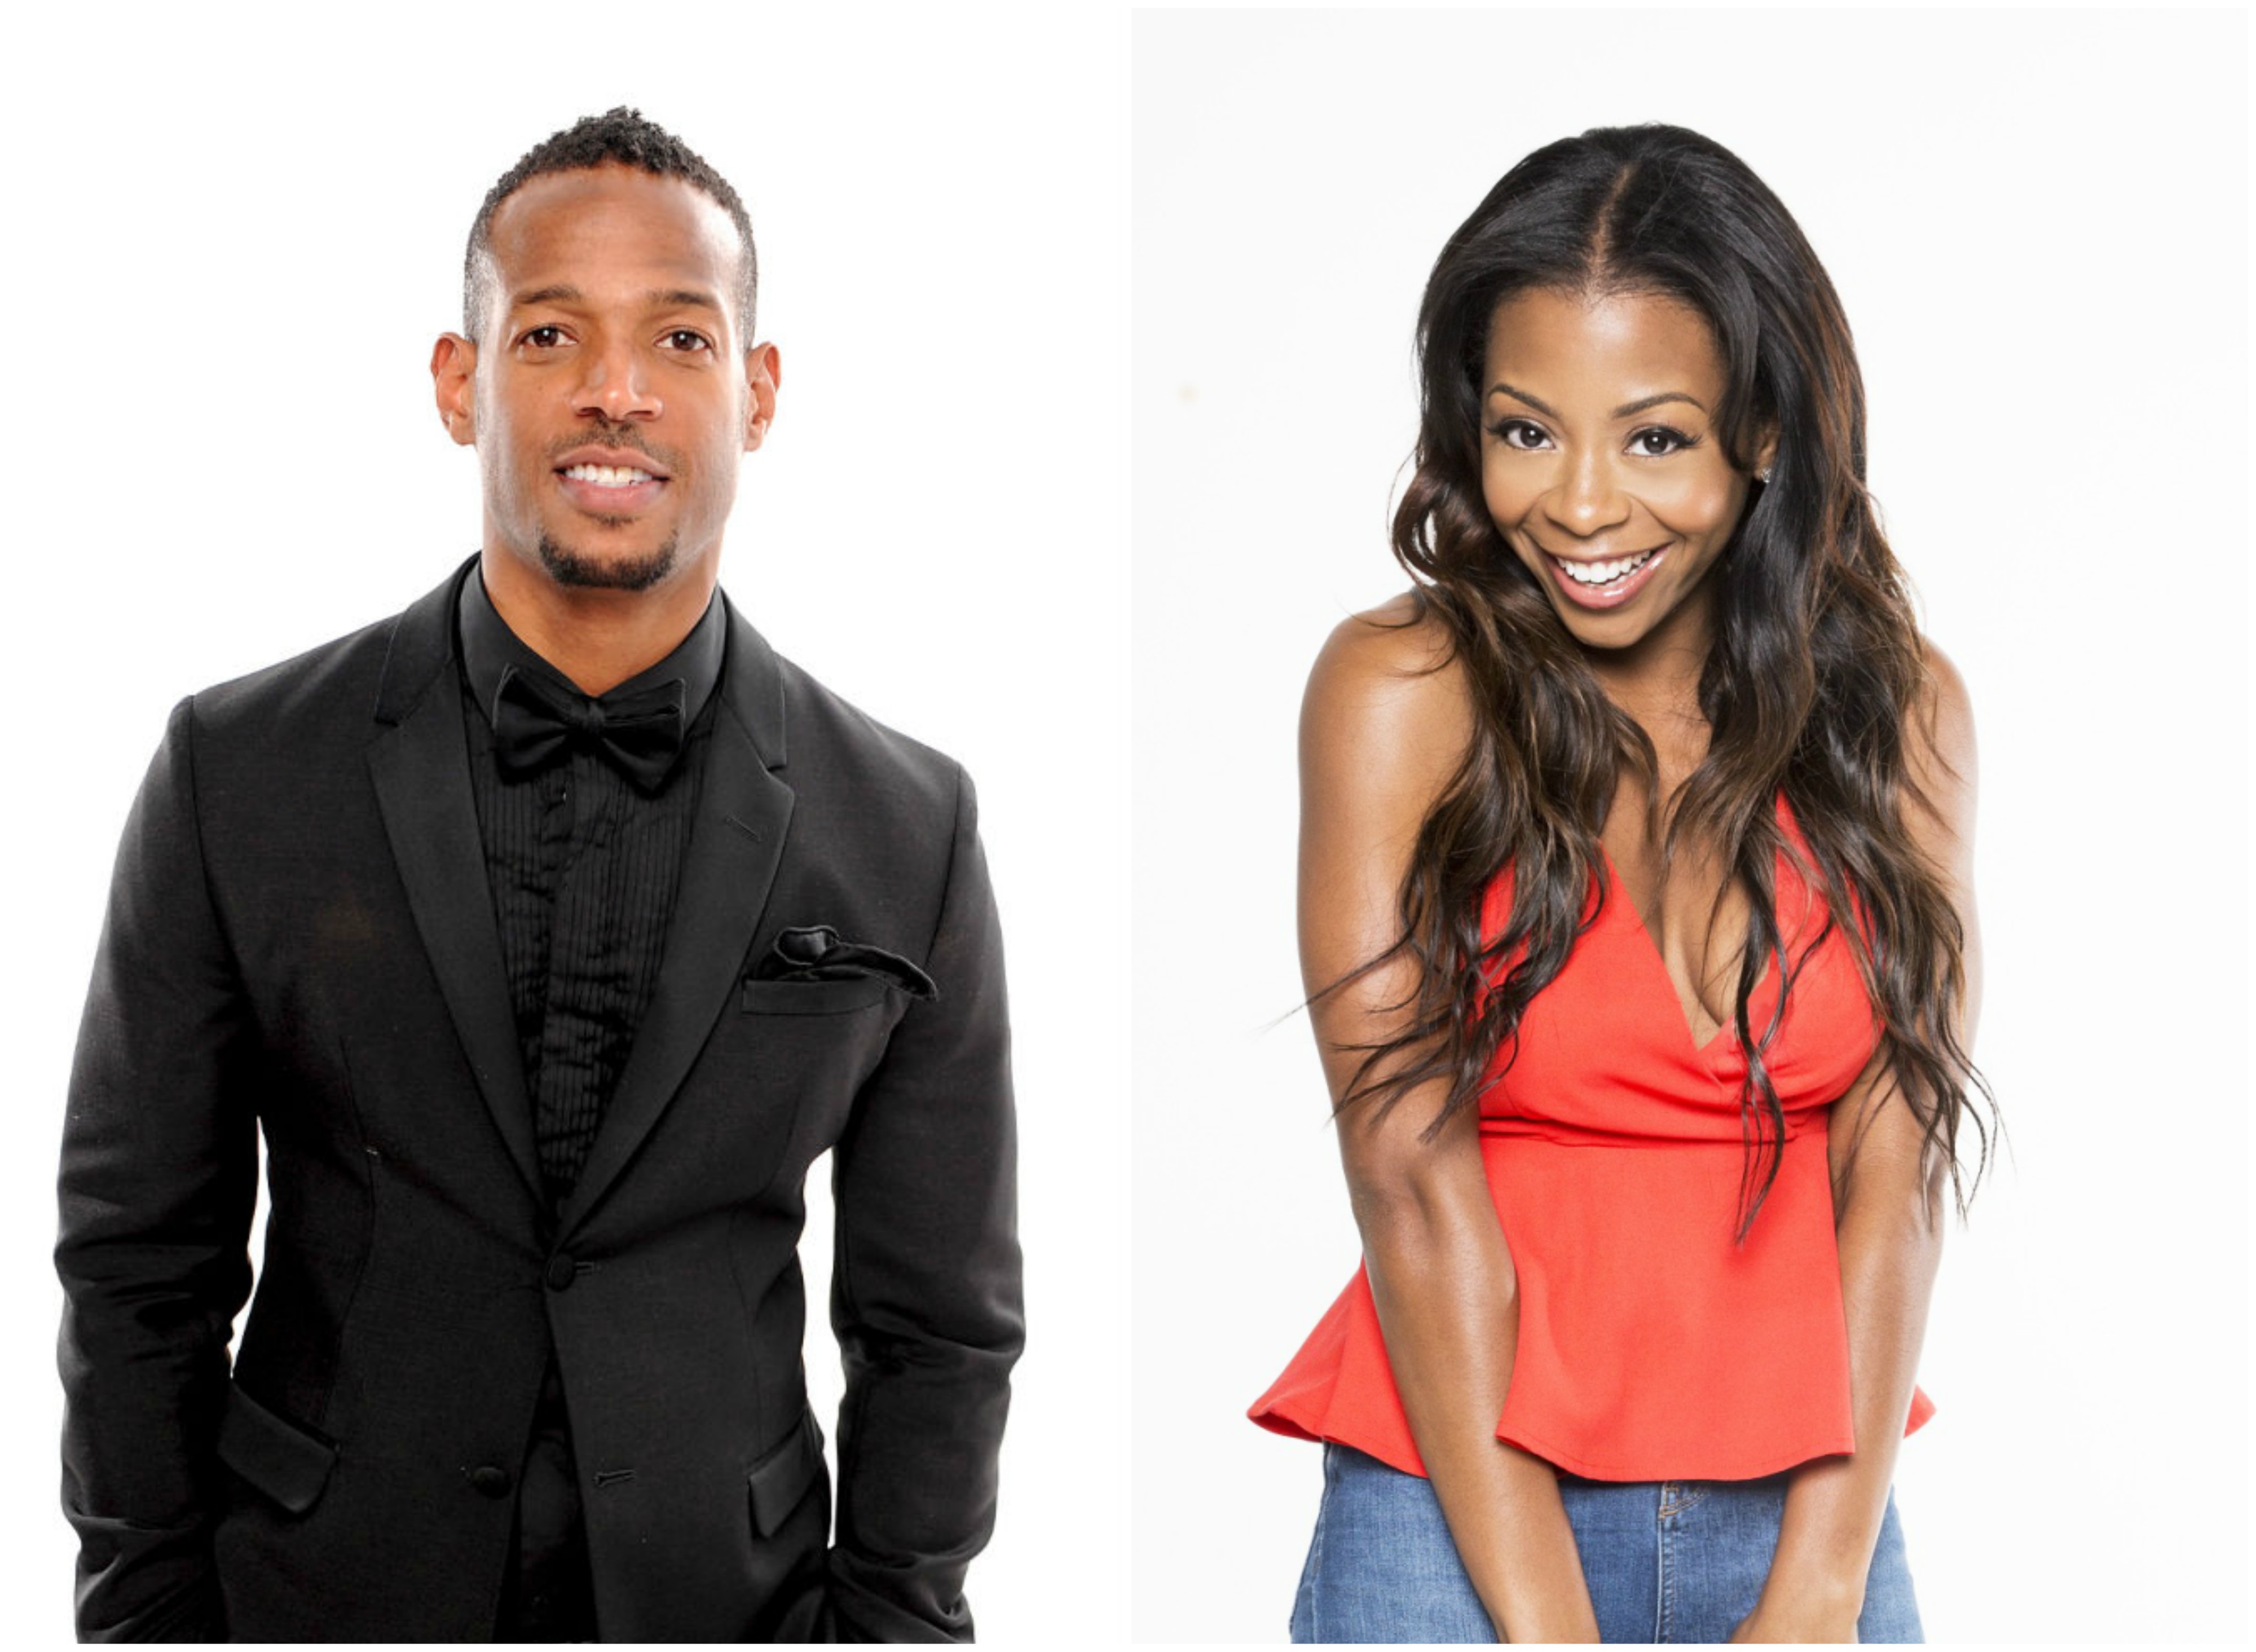 Marlon Wayans has partnered again with Netflix on the new comedy Sextuplets...